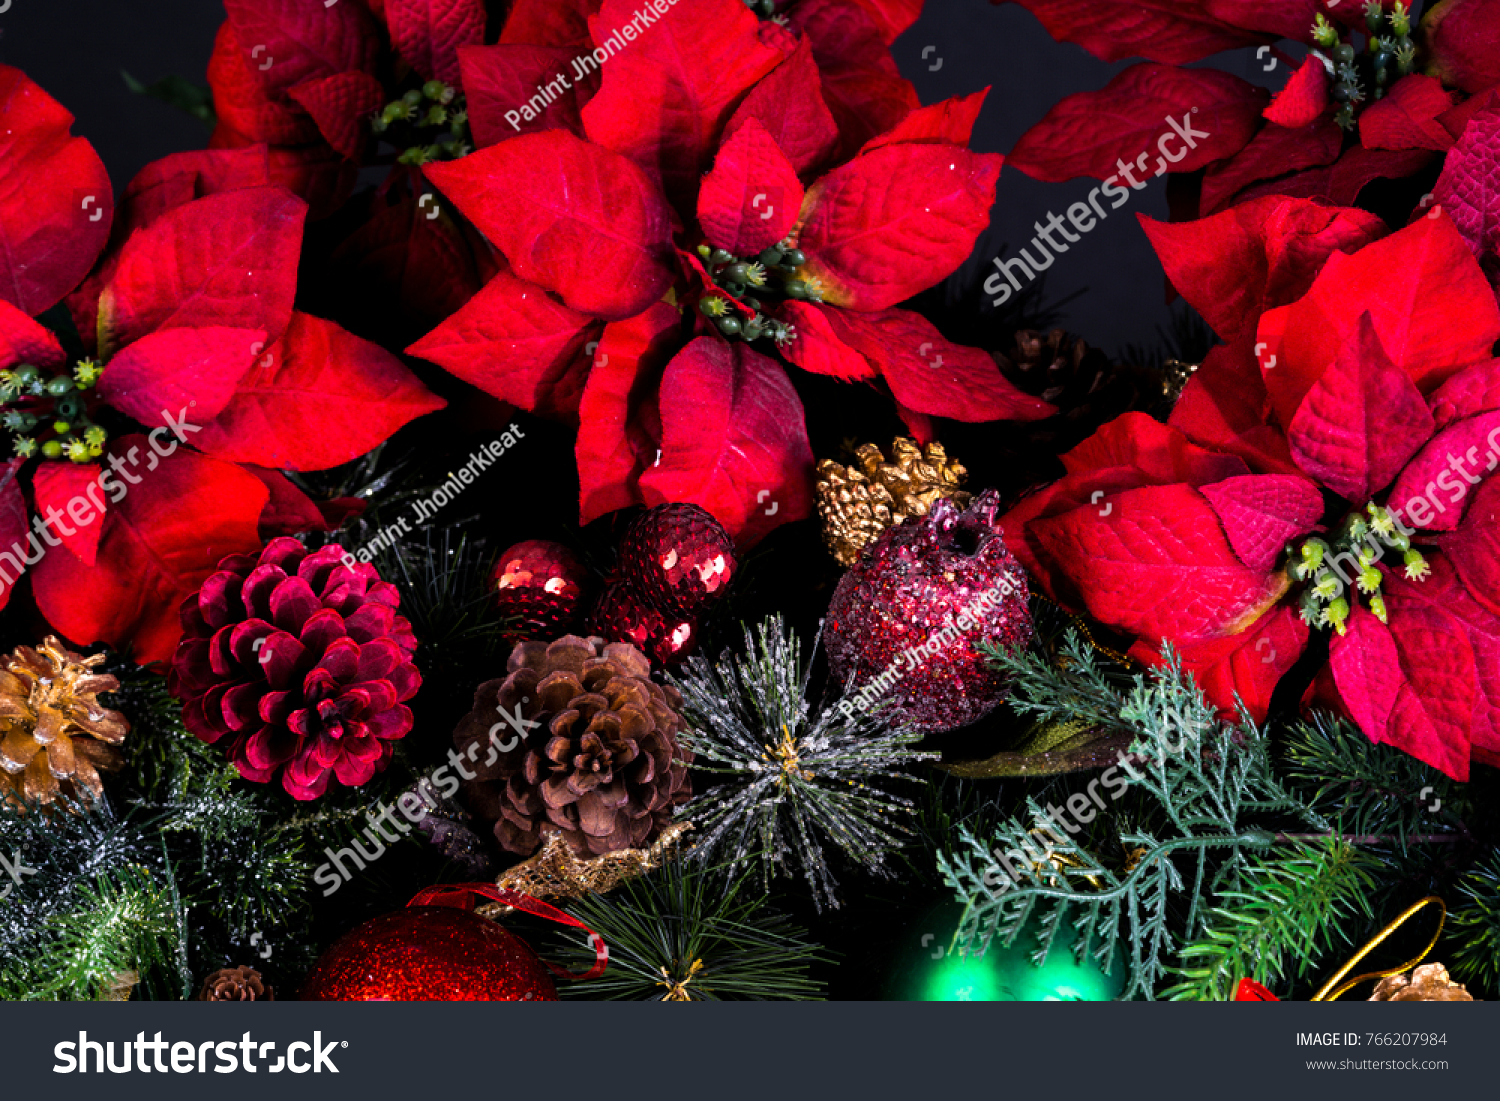 Christmas decoration as a background./ Christmas decoration #766207984